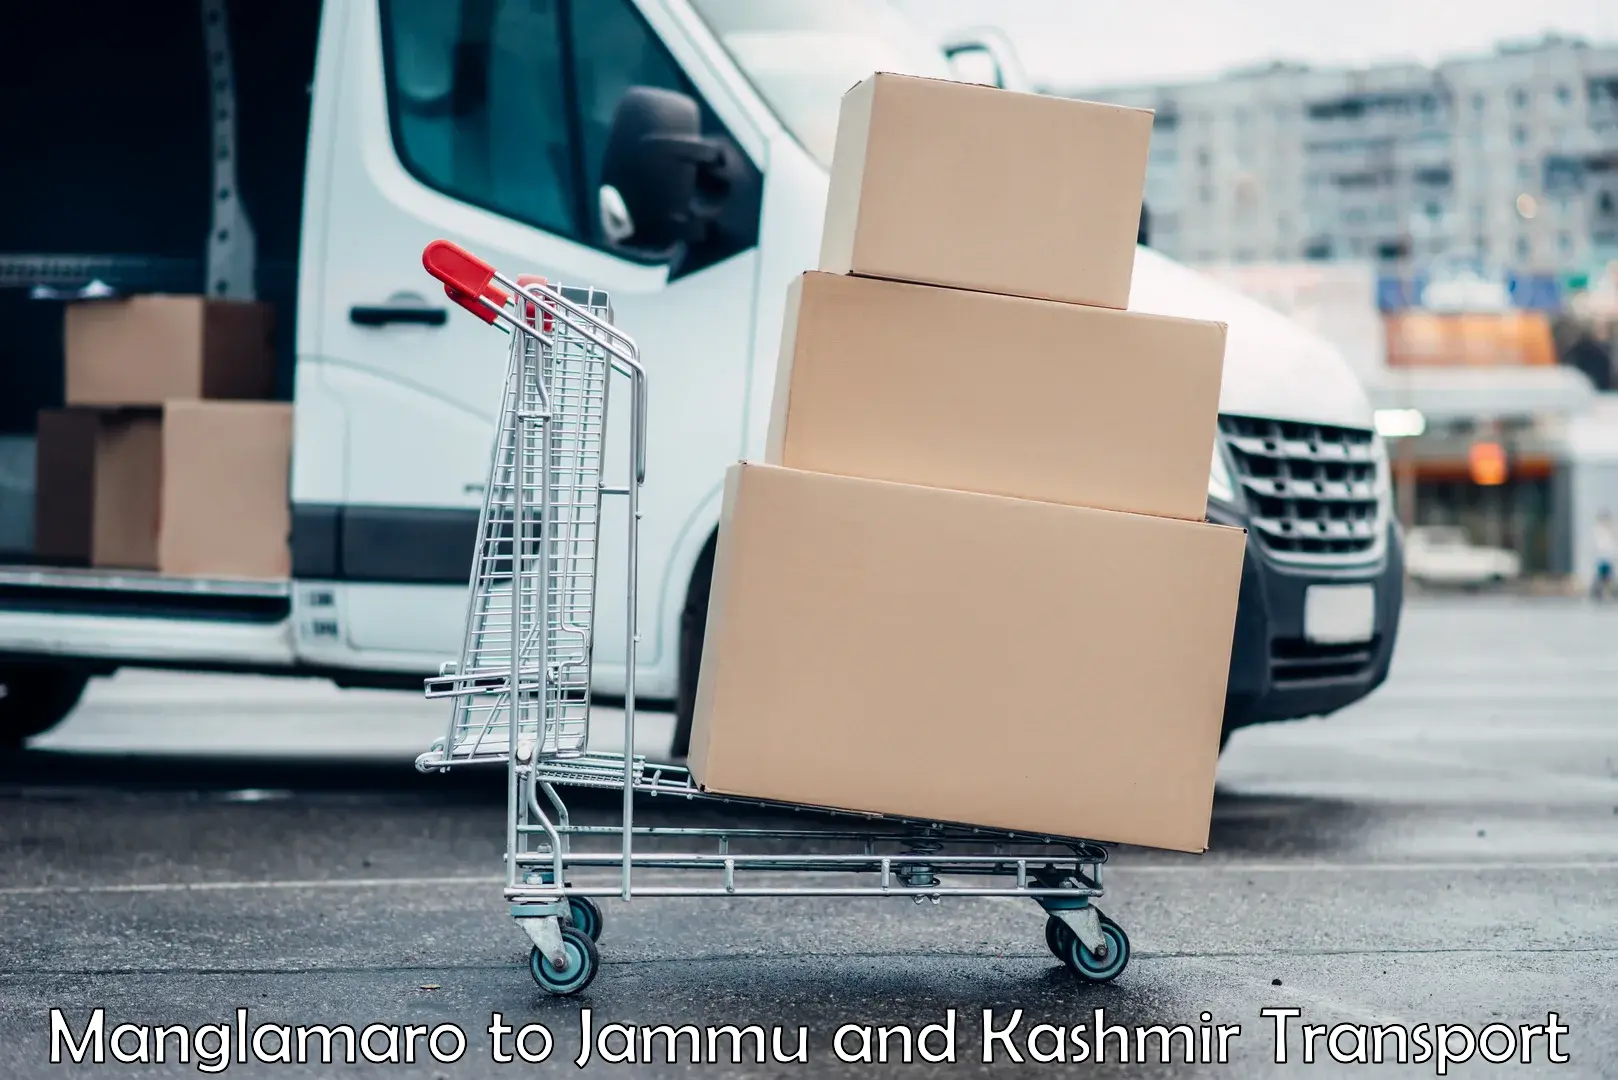 Package delivery services Manglamaro to Jammu and Kashmir